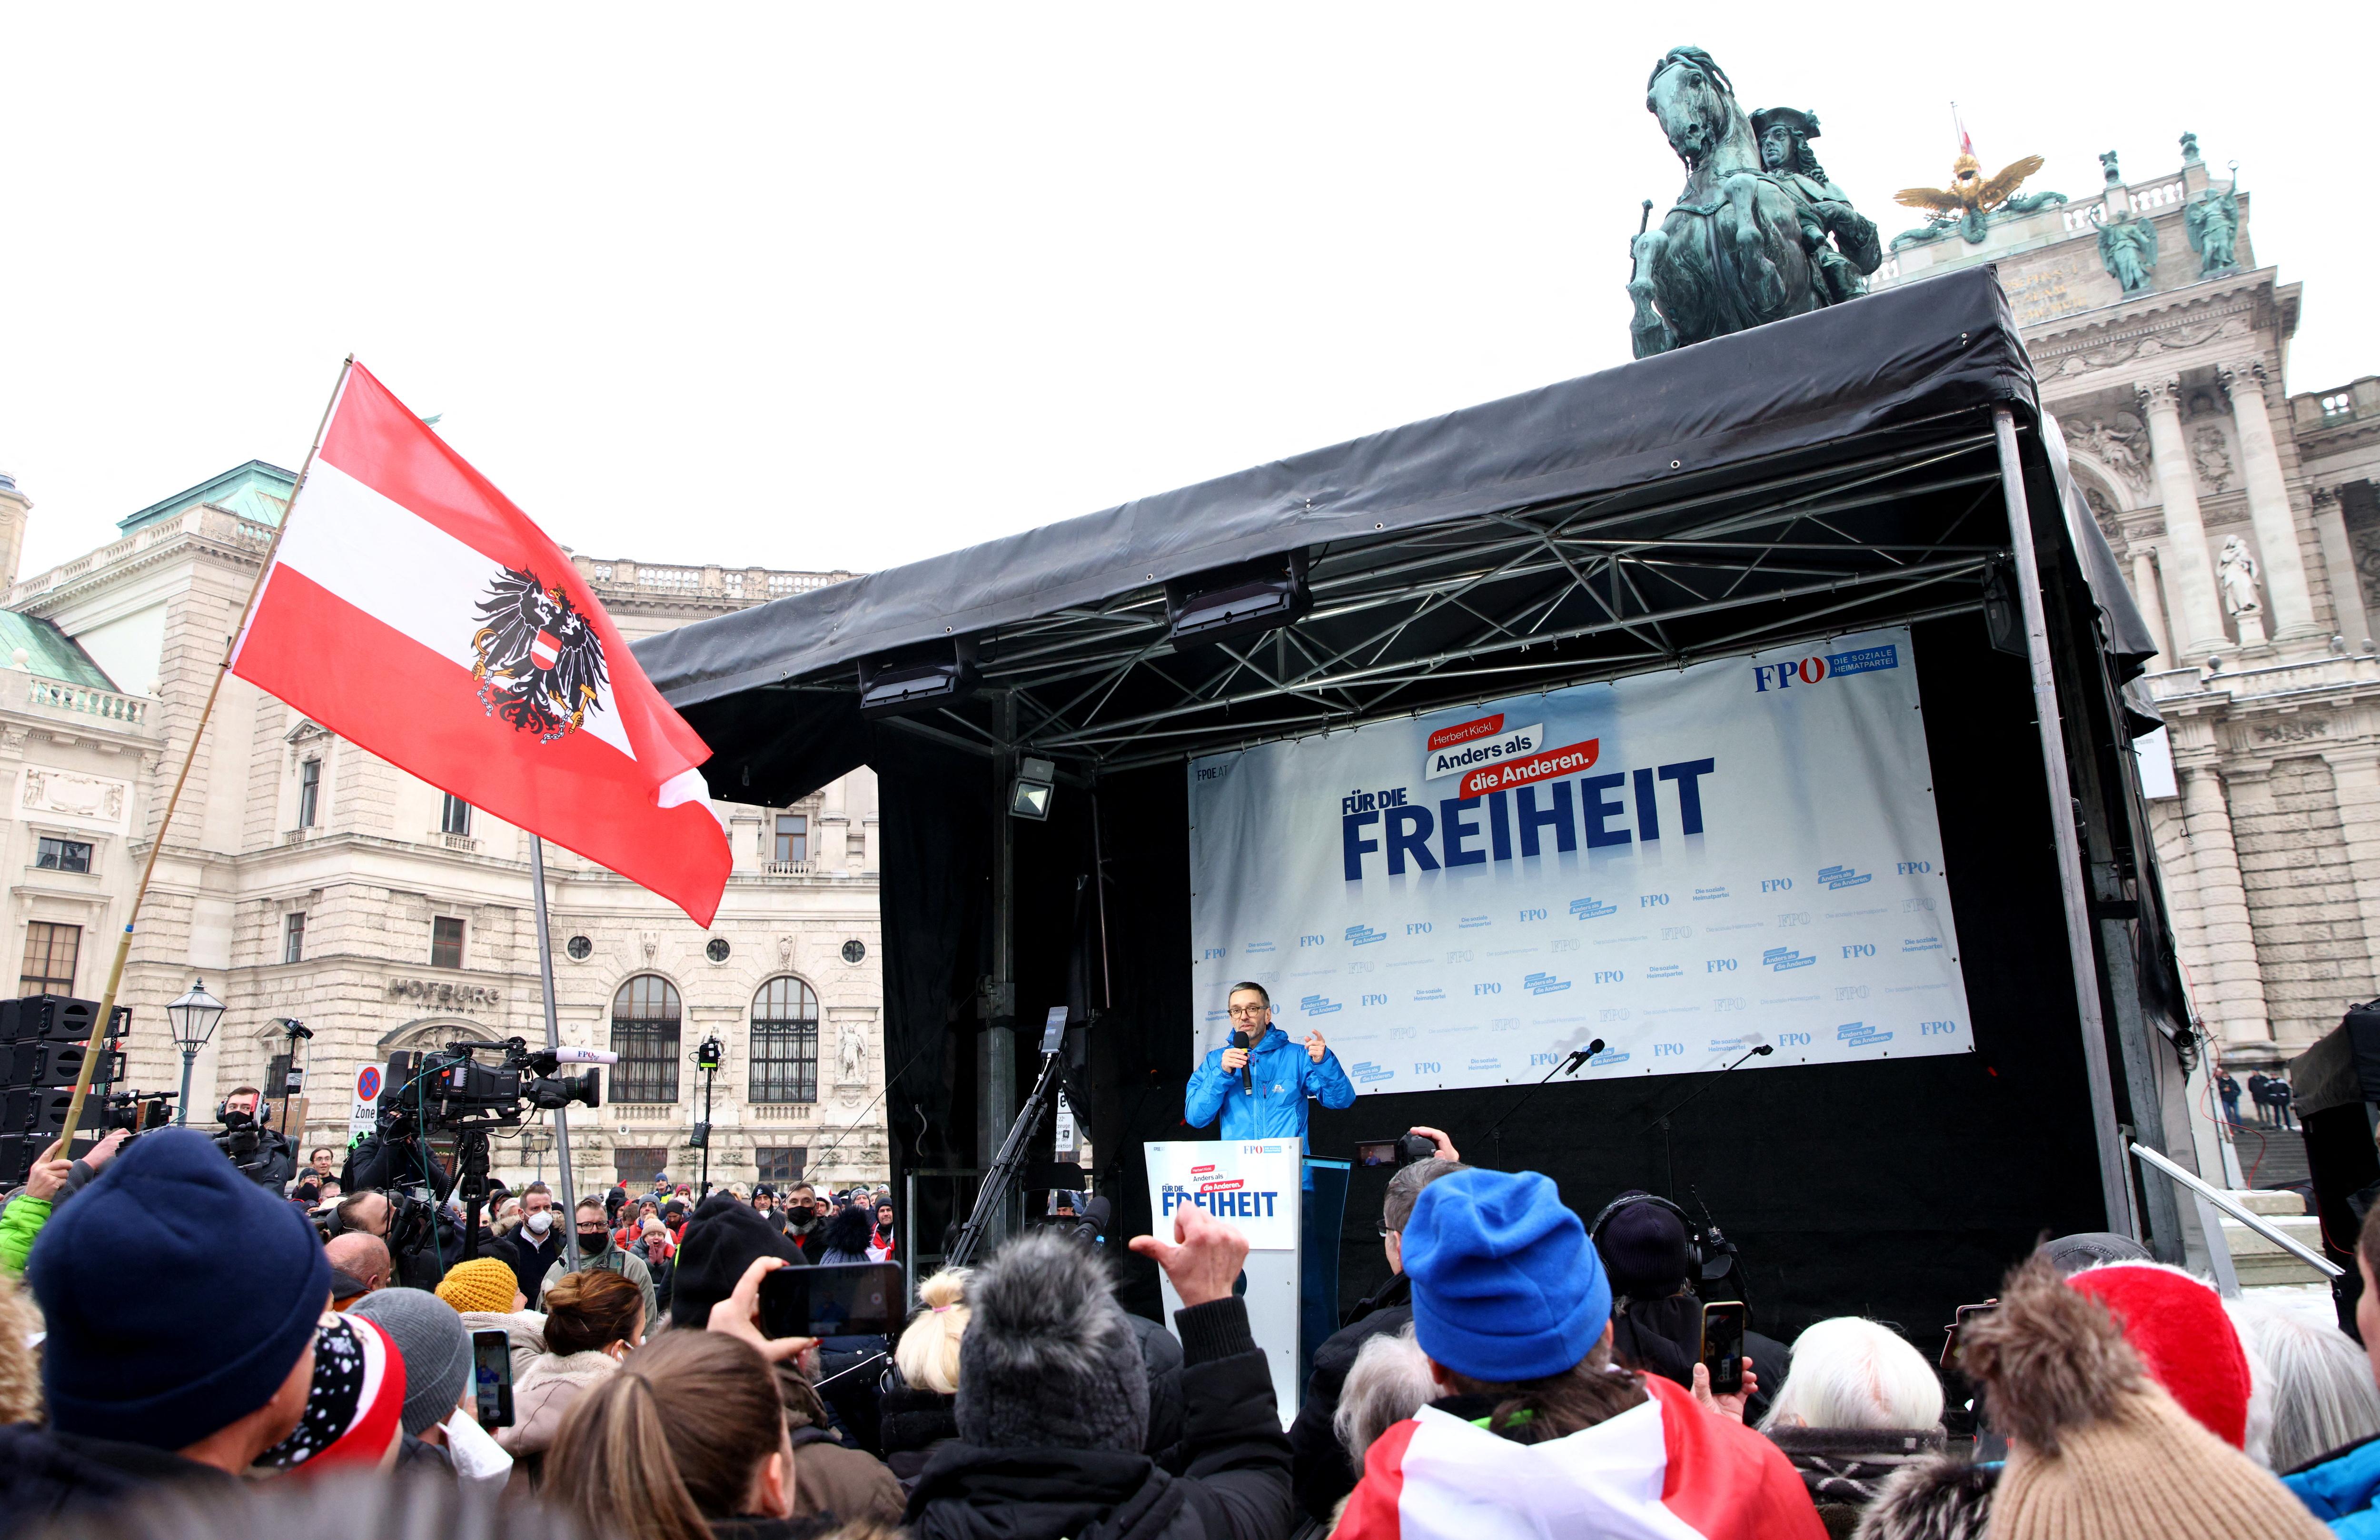 Austria's head of the Freedom Party (FPOe) Herbert Kickl speaks on stage during a protest against the coronavirus disease (COVID-19) restrictions and the vaccine mandate in front of Hofburg Palace in Vienna, Austria, December 11, 2021.